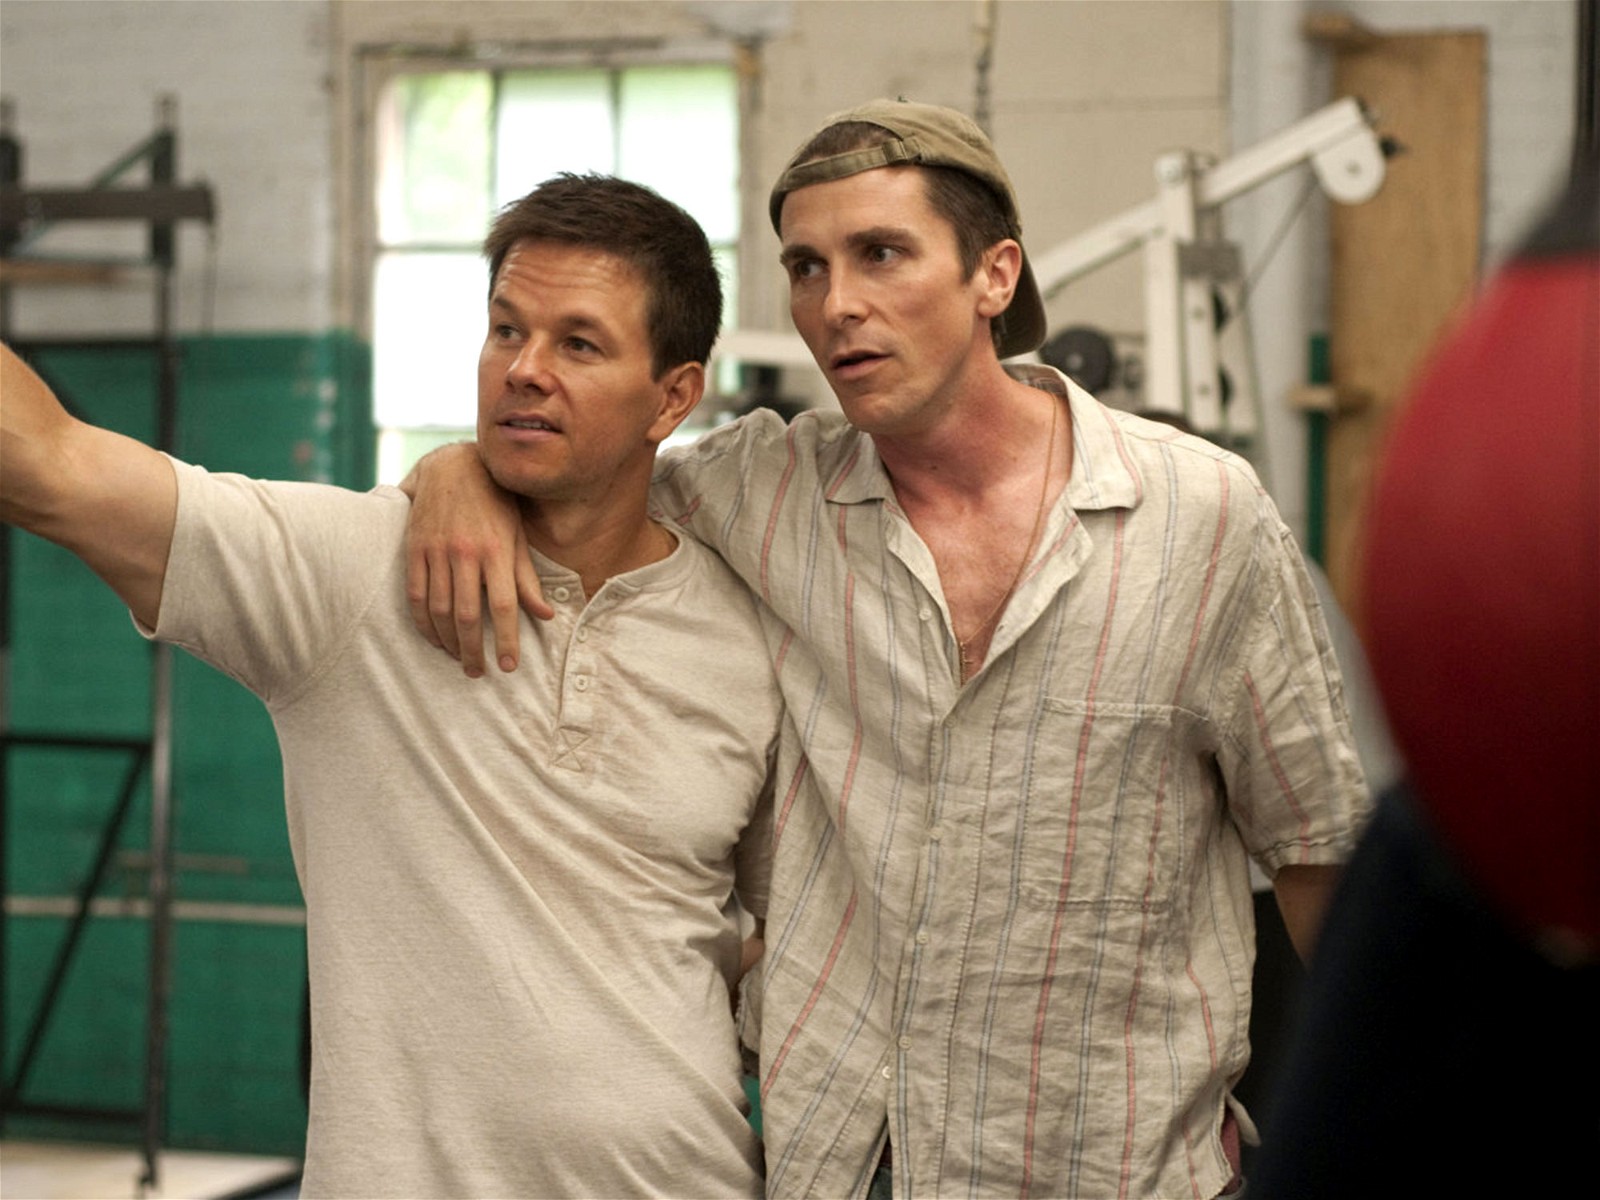 Mark Wahlberg and Christian Bale in a still from The Fighter